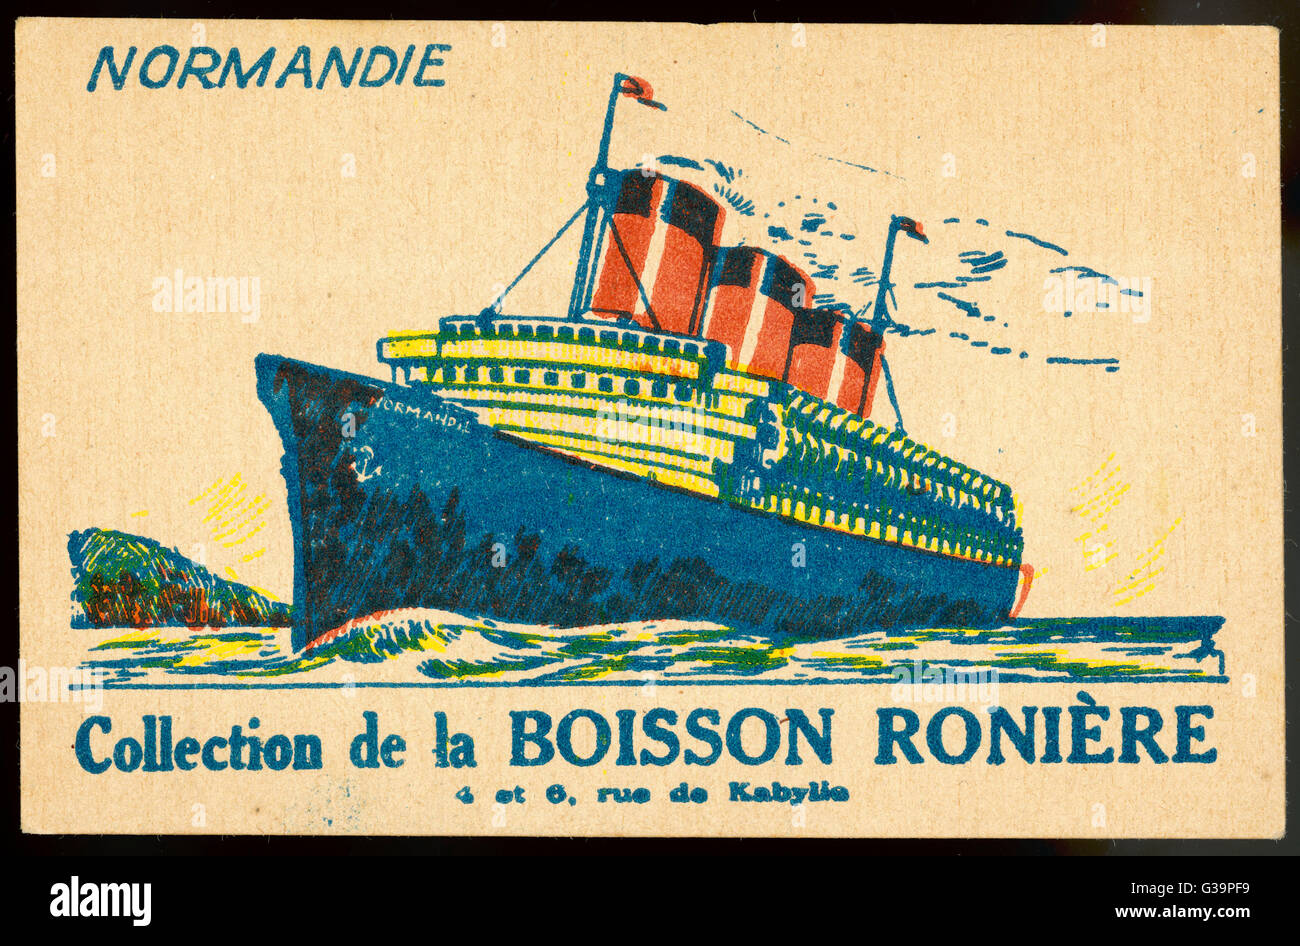 A typical publicity item  associating the company with  the newest glory of the French  merchant fleet       Date: 1935 Stock Photo